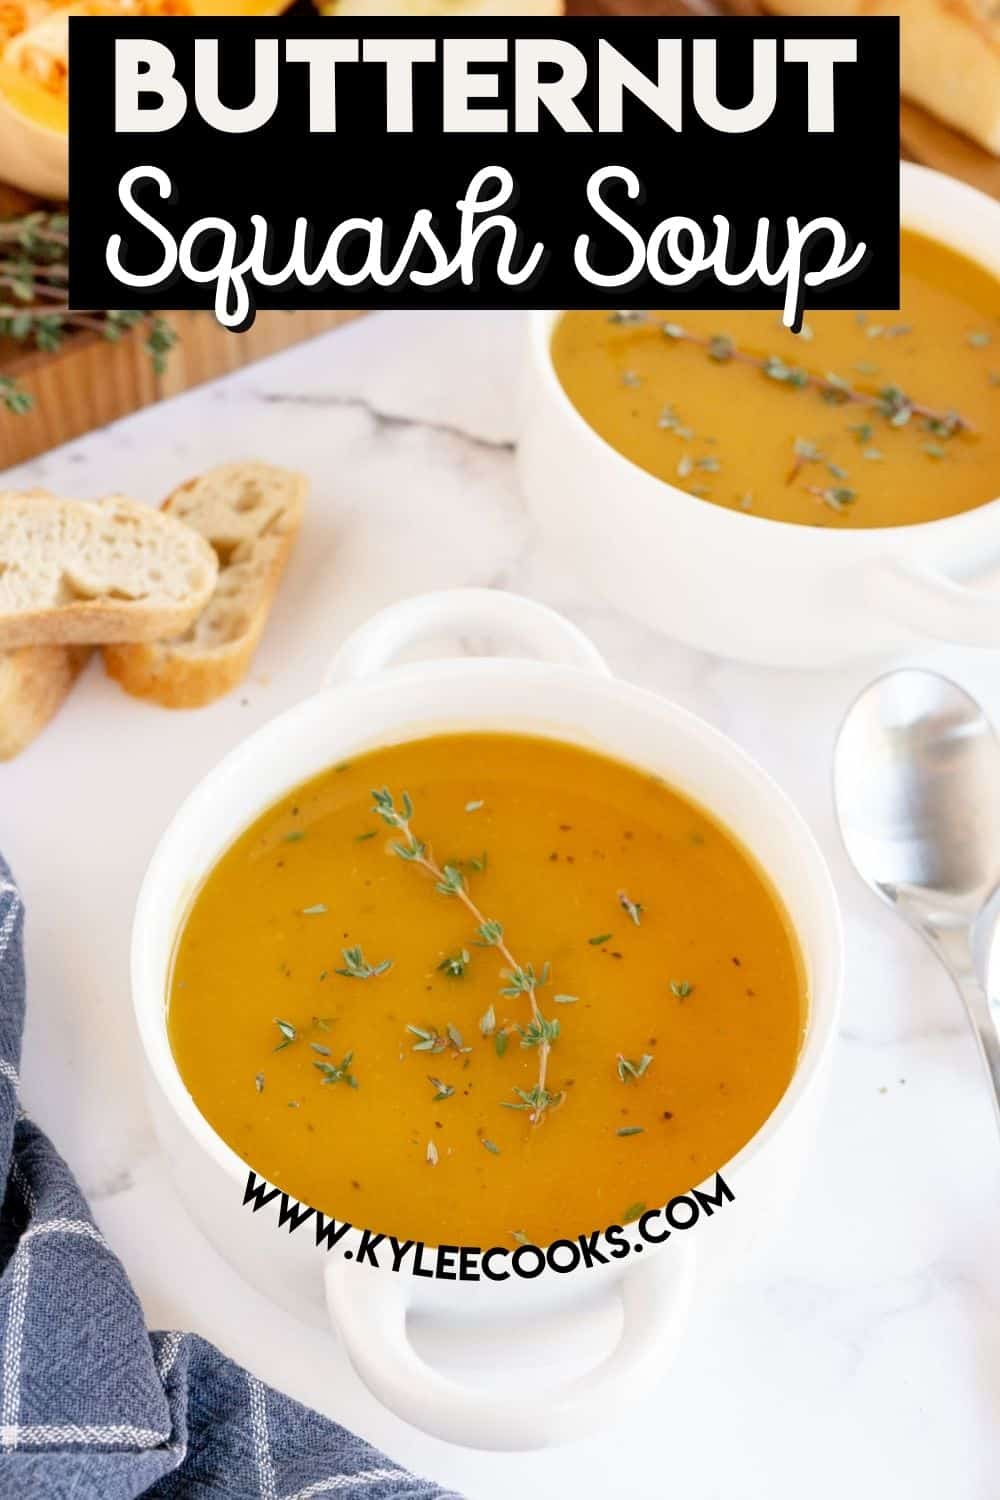 butternut squash soup with apple with recipe name overlaid in text